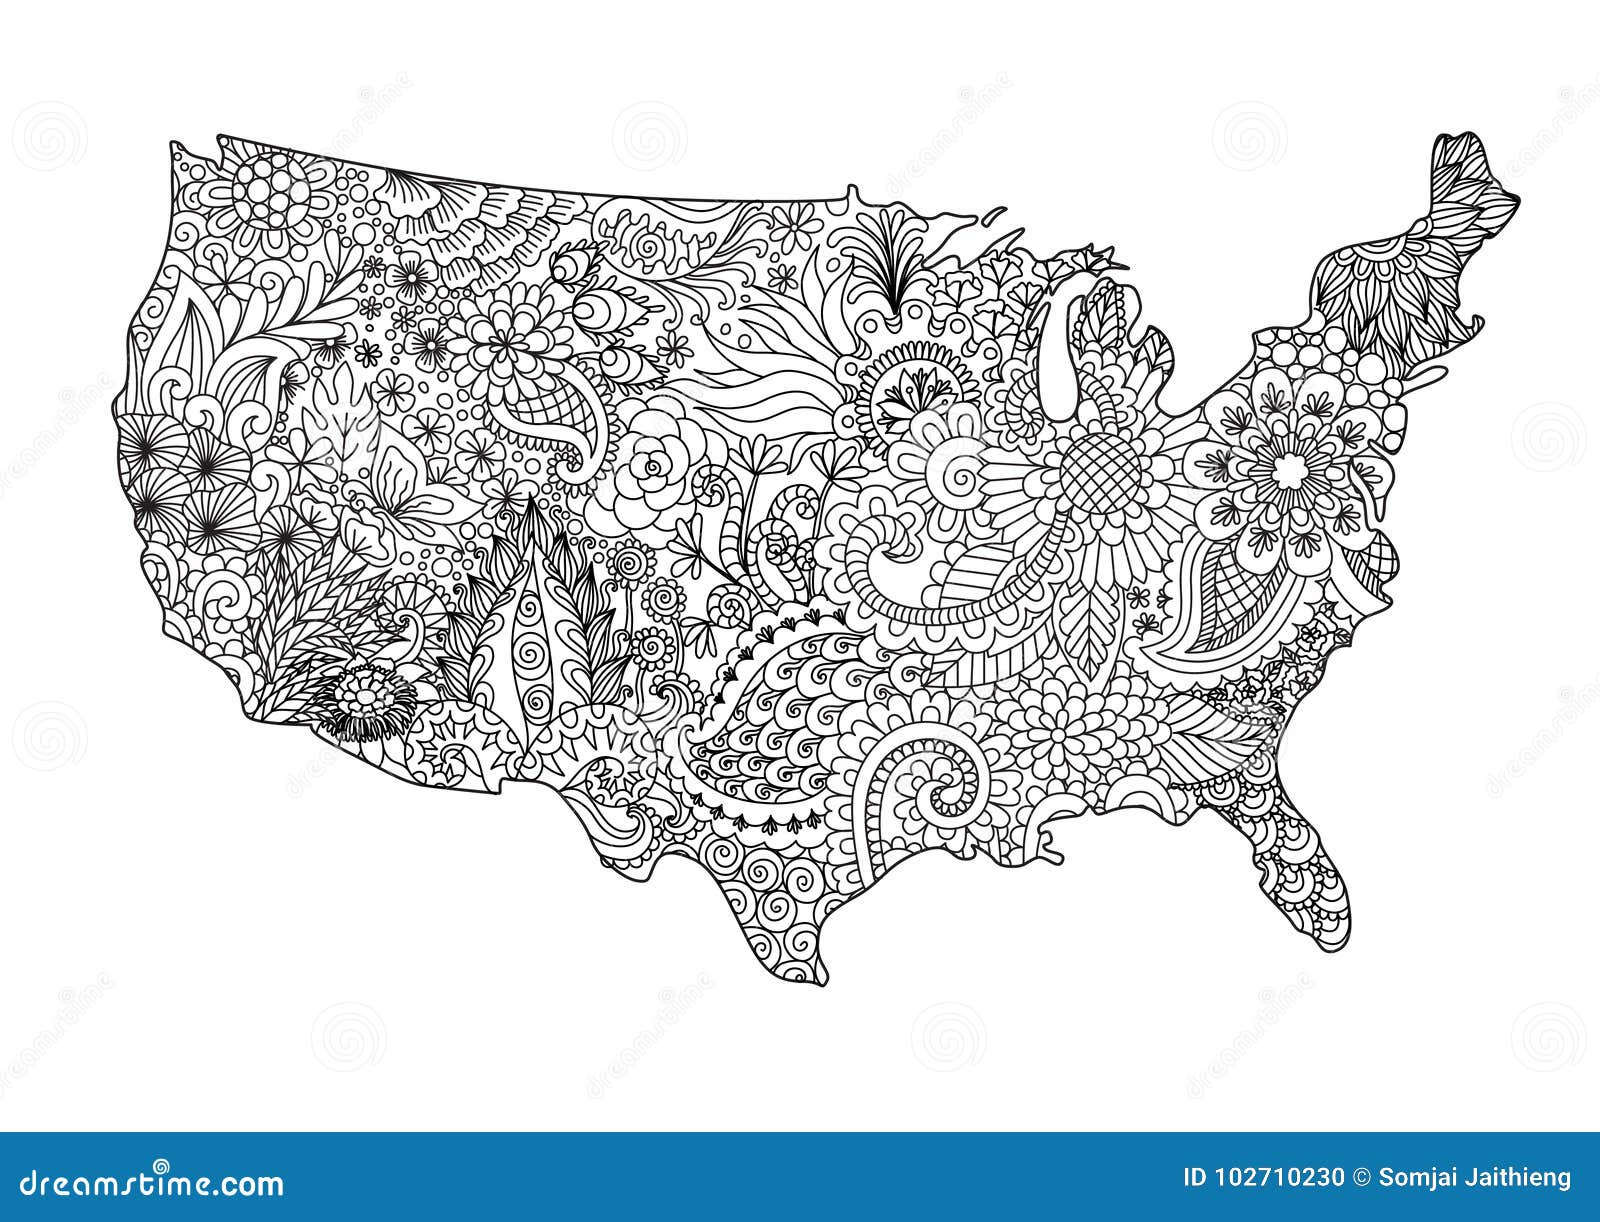 Download Floral USA Map For Design Element And Adult Coloring Book ...